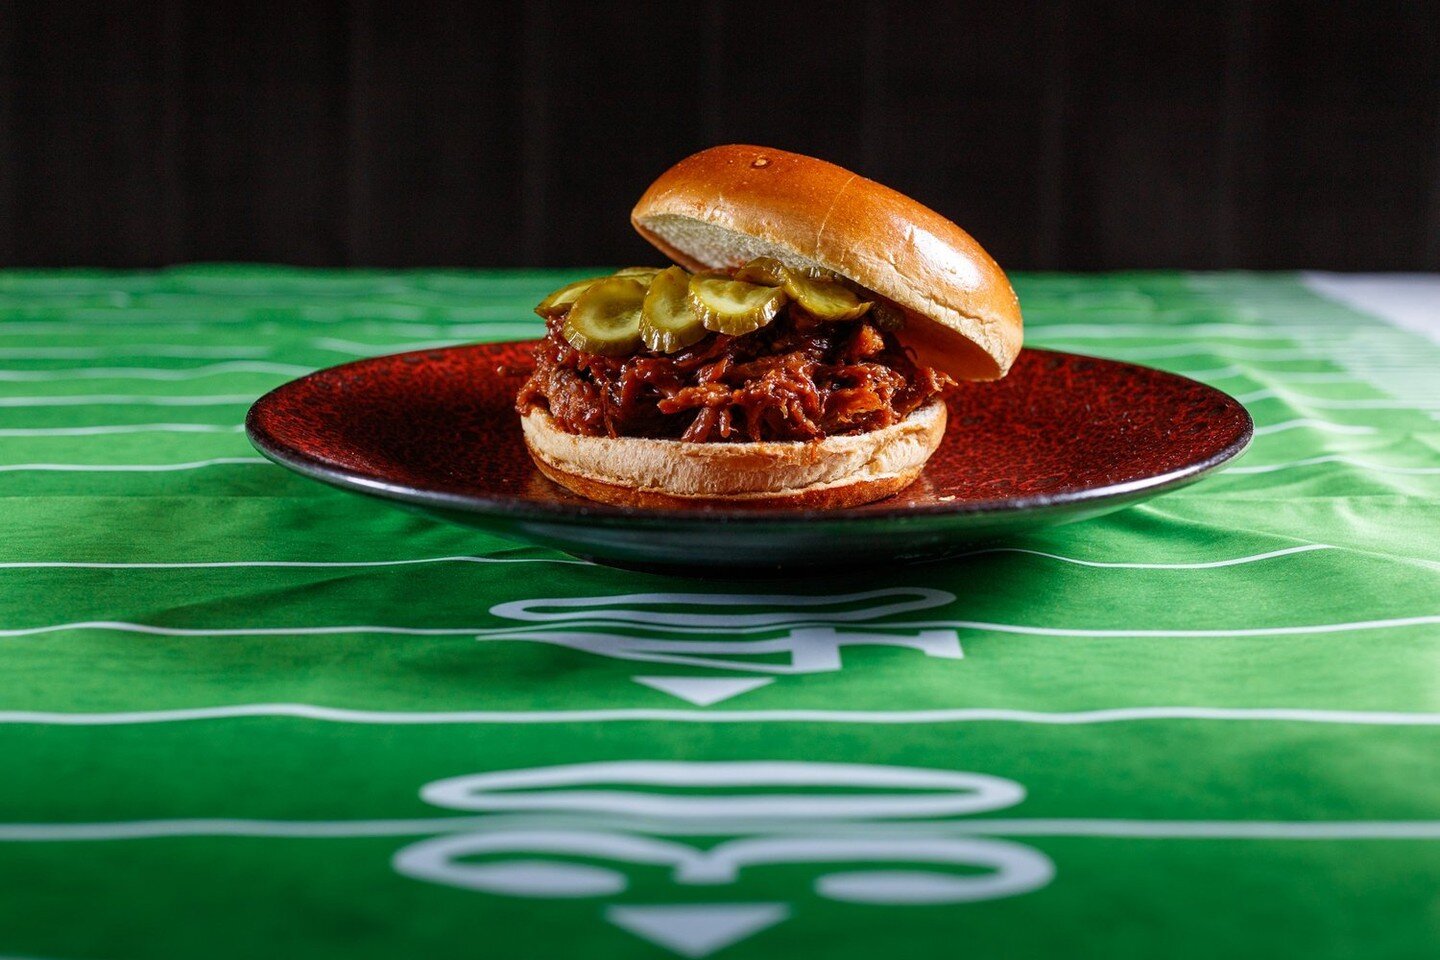 🏈 Get ready for kickoff with a game-day spread brought to you by @thealineagroup on Super Bowl Sunday!

From 1:30-2:30pm pick up their Party Platter for you and yours here in the Tap Room! Pre-orders only, no day-of pickups so, plan ahead!

Platter 